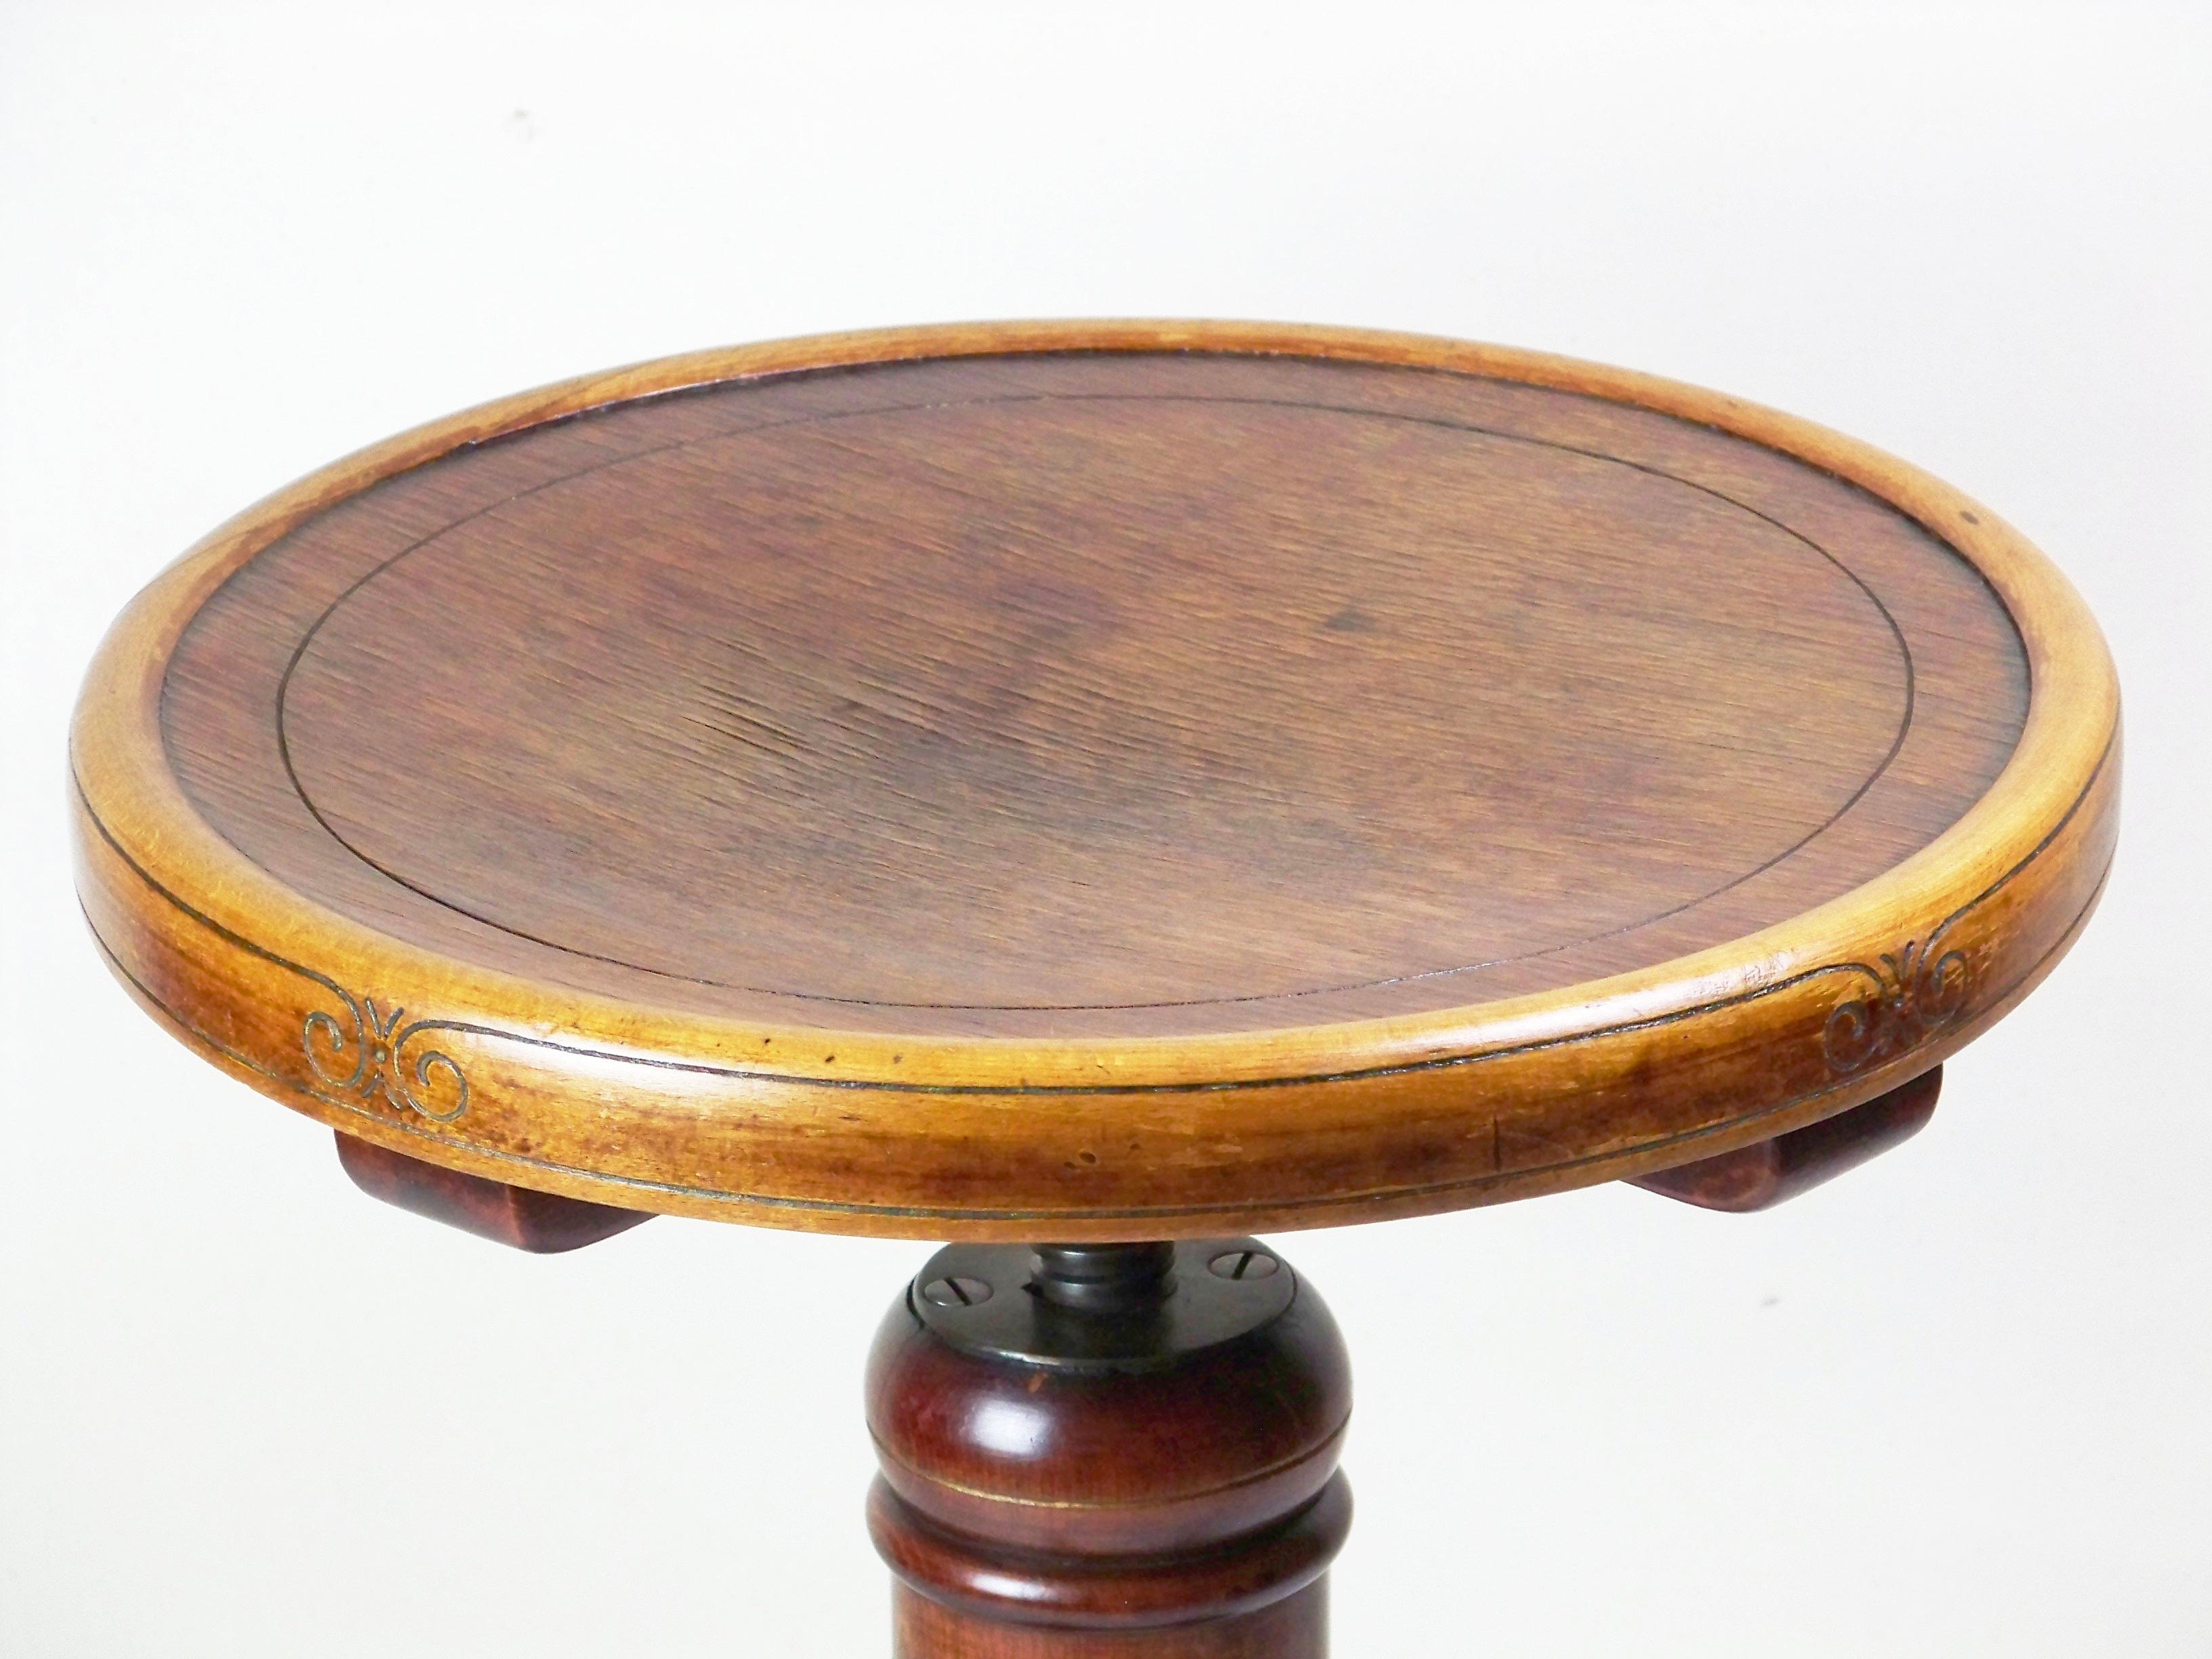 In very good original condition with a beautiful patina. Perfectly cleaned and polished with shellac.